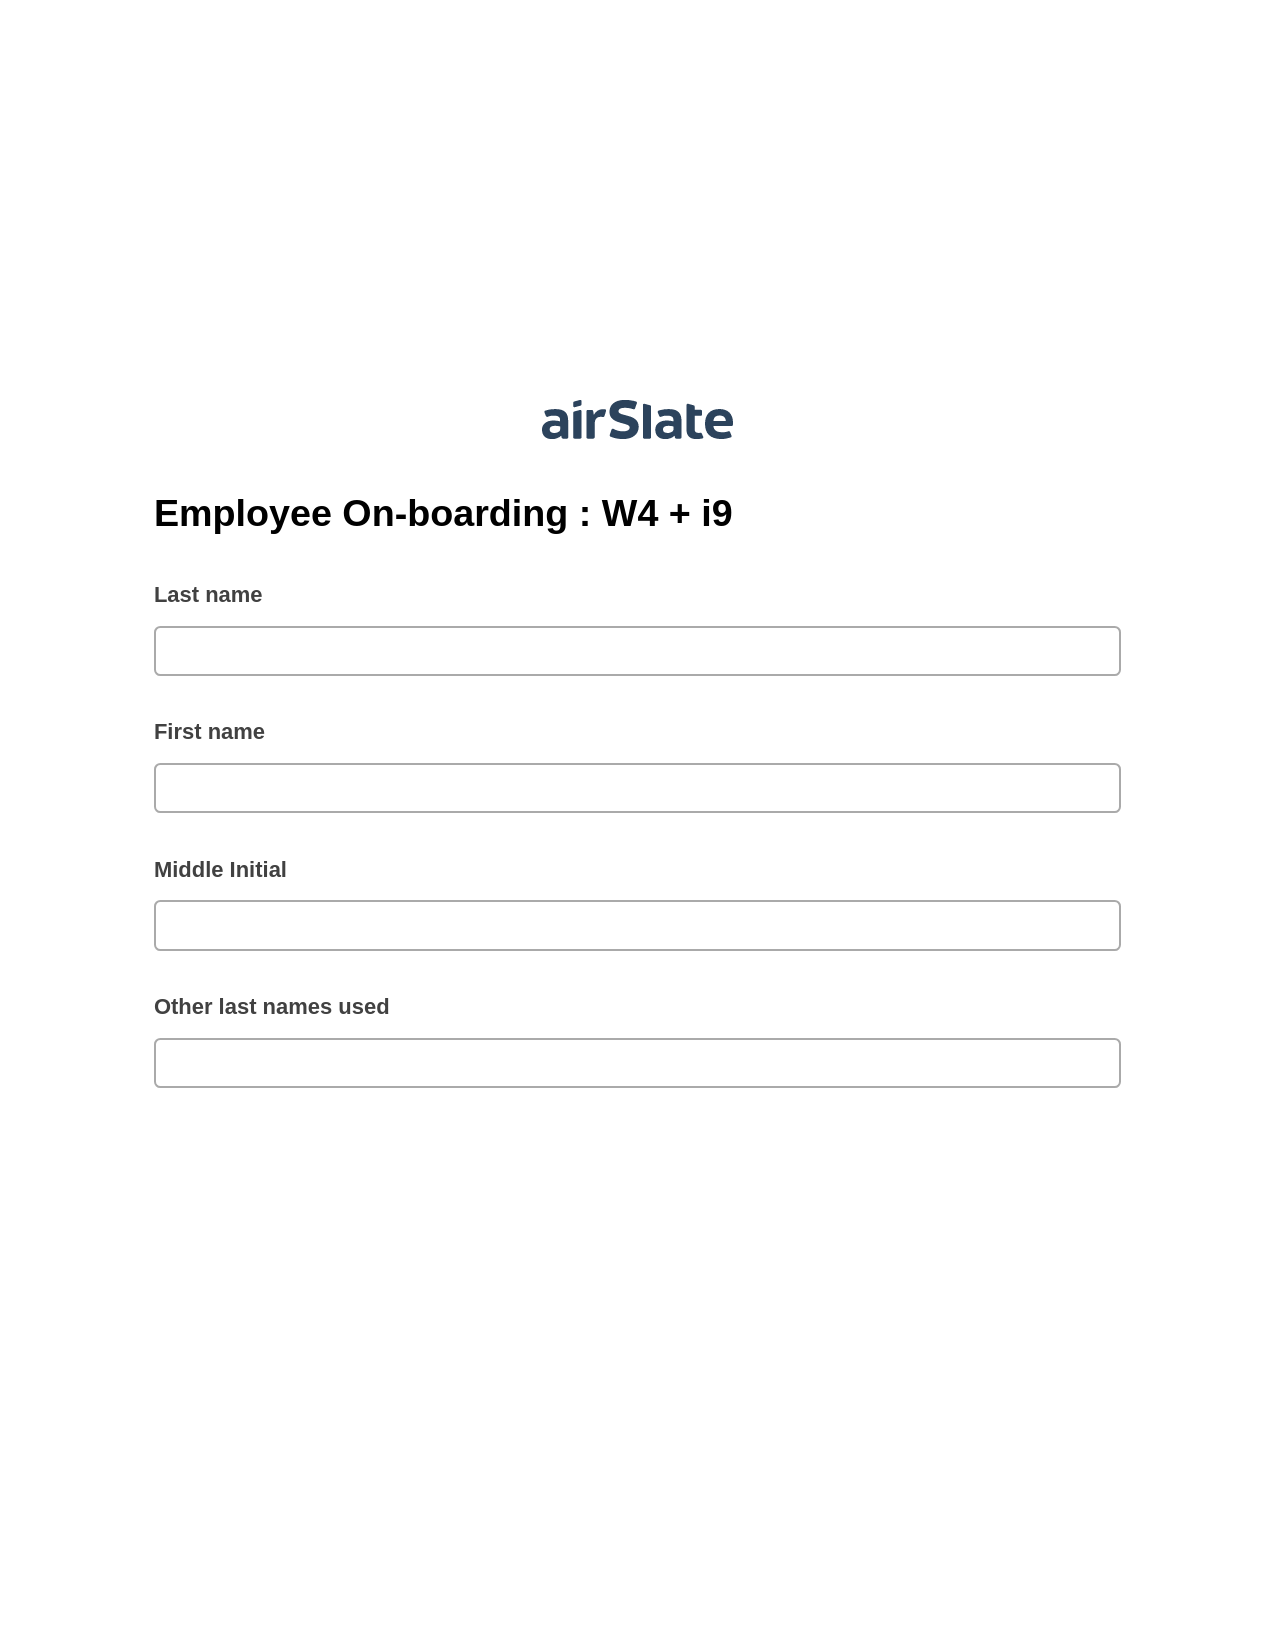 Employee On-boarding : W4 + i9 Pre-fill from CSV File Bot, Unassign Role Bot, Email Notification Postfinish Bot